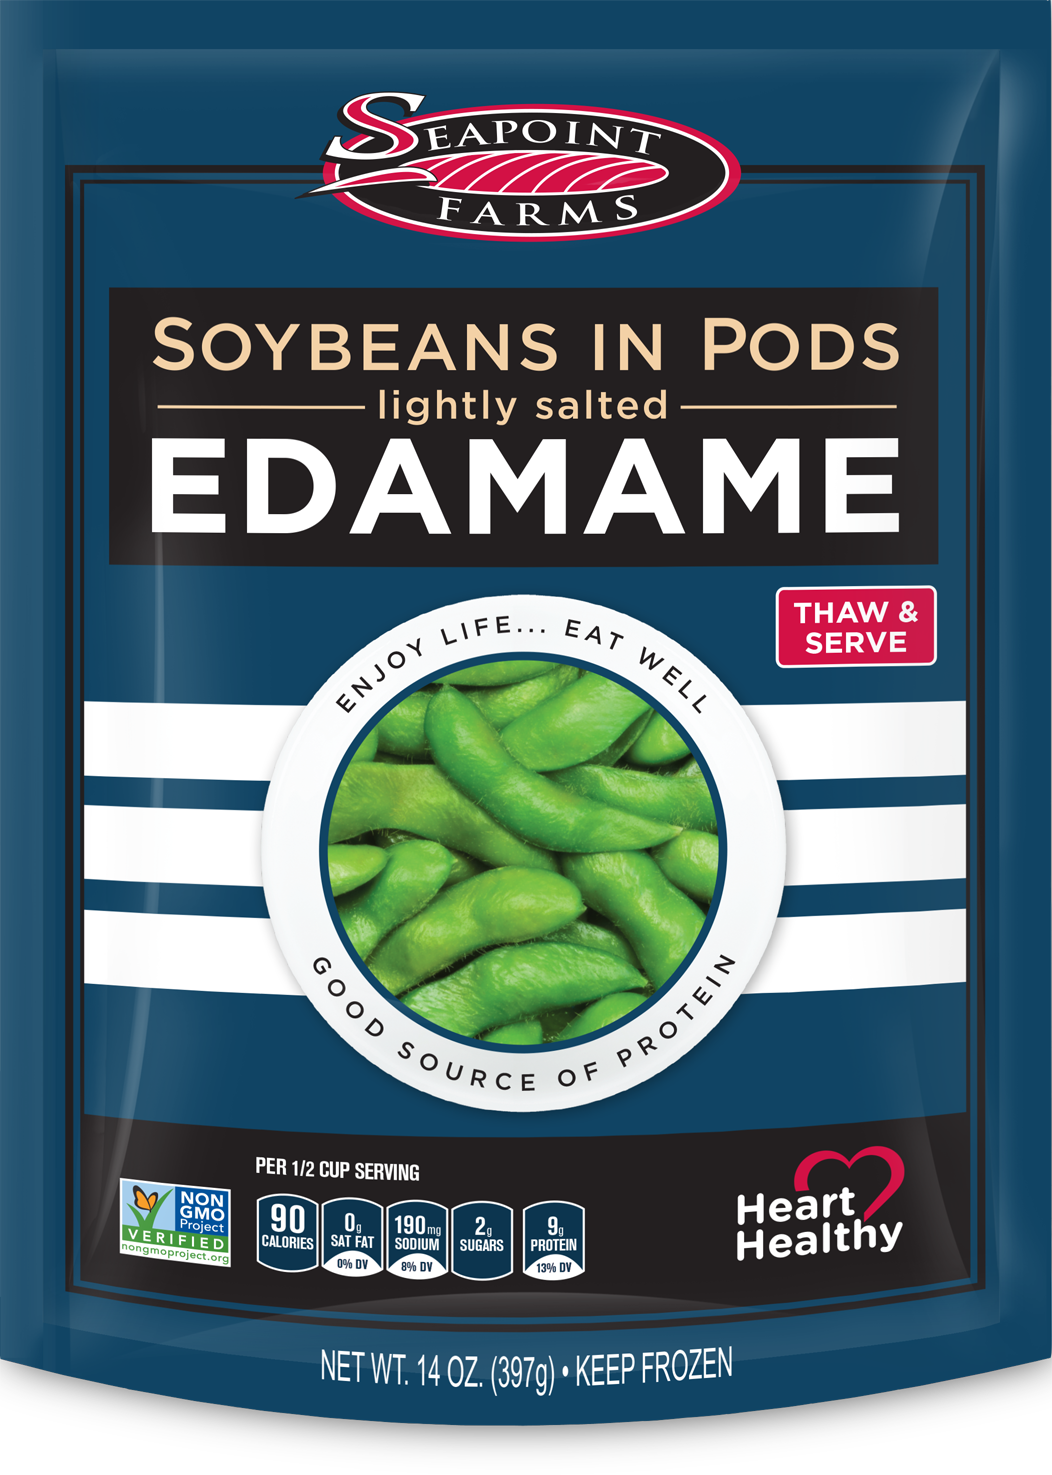 Frozen Edamame Soybeans Lightly Salted